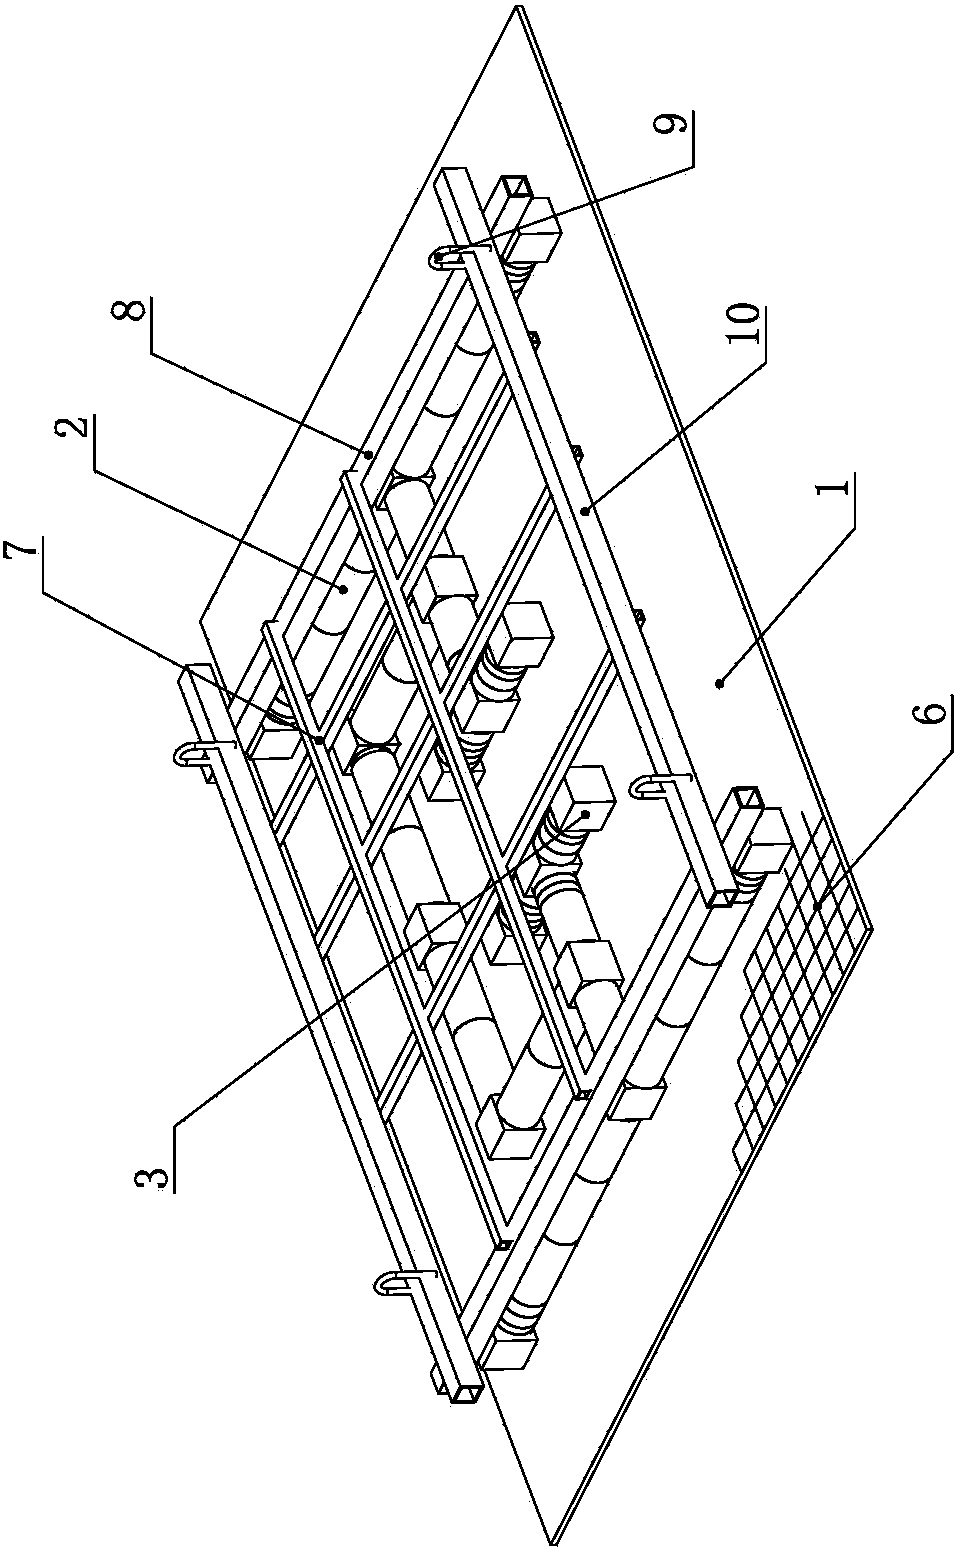 Laying method of casting system